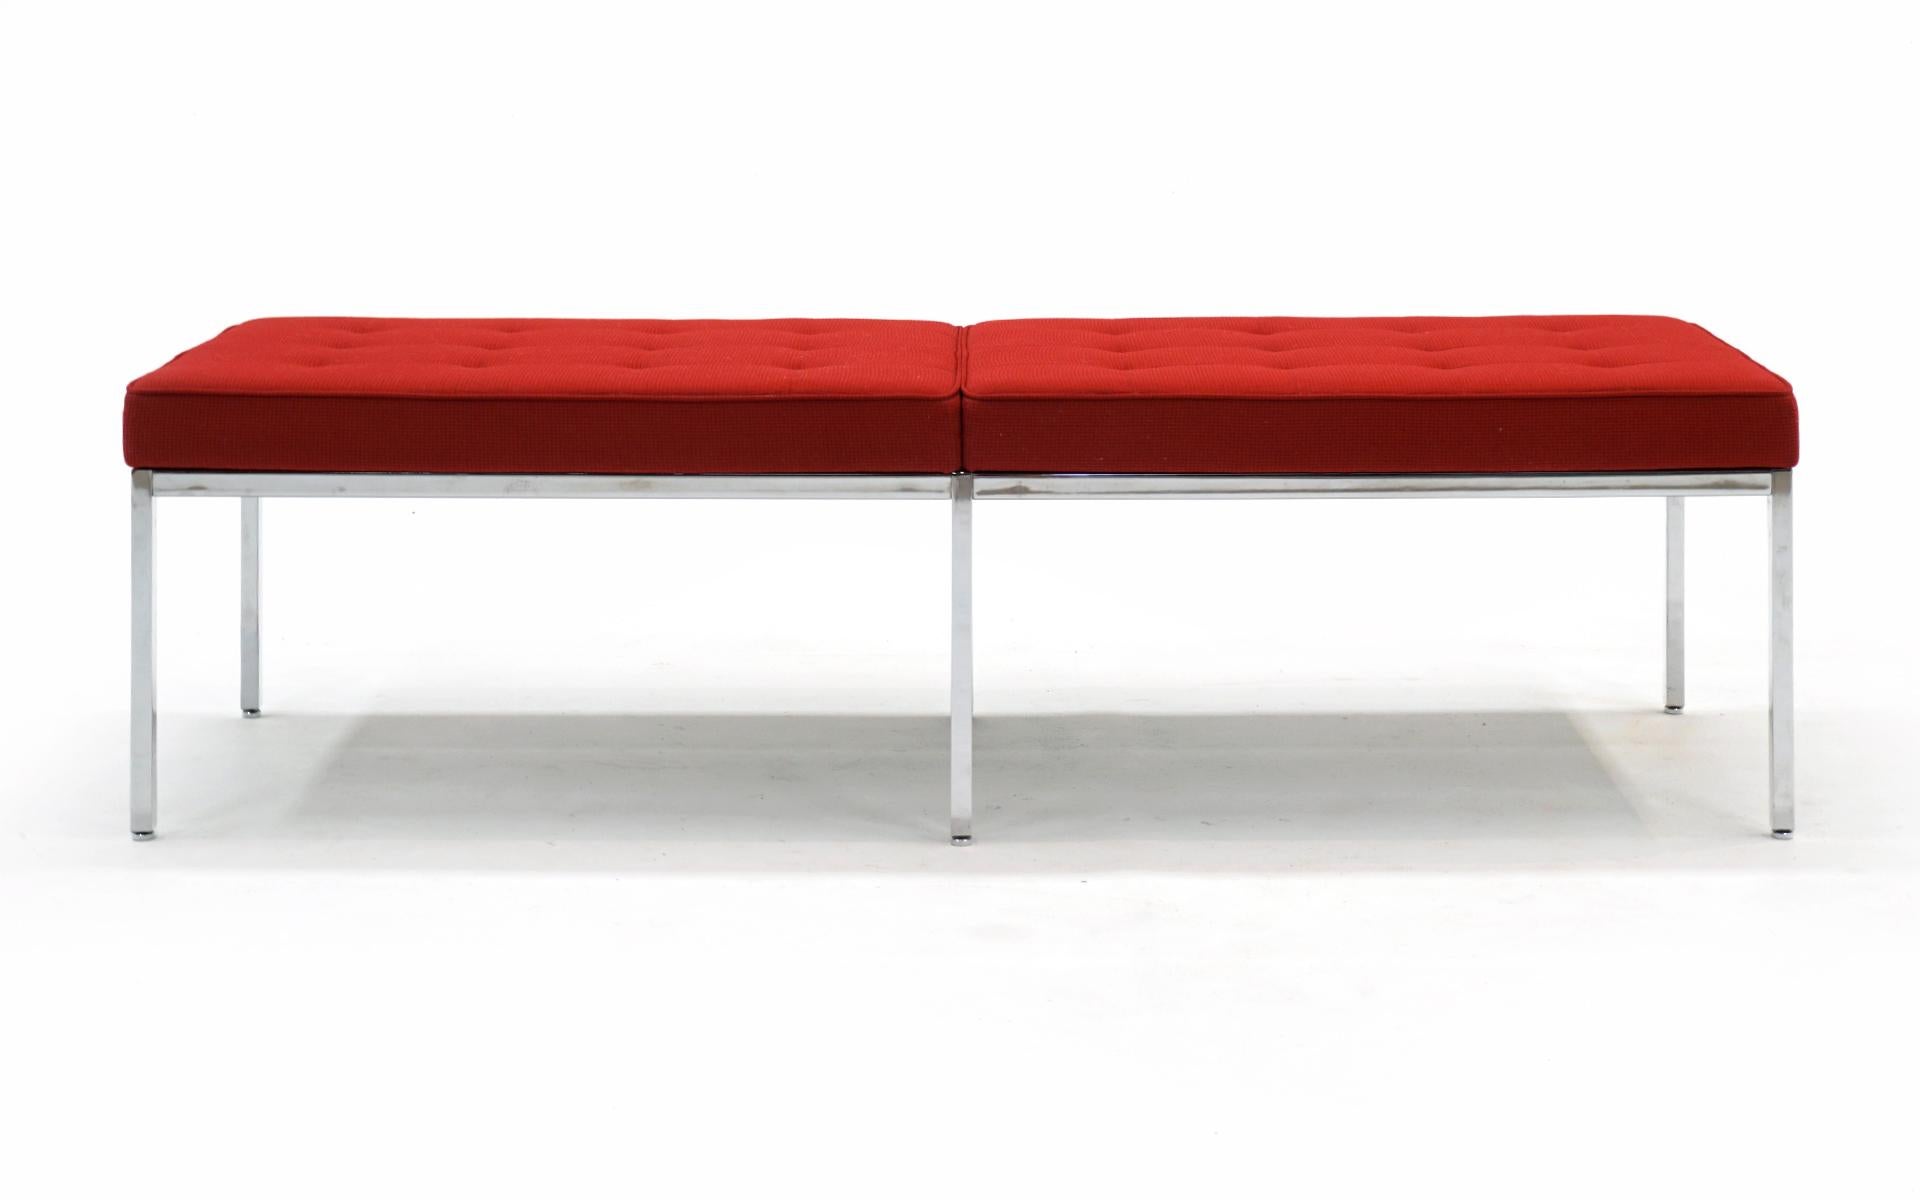 Three or four seat Florence Knoll Bench in red knoll fabric and heavy chromed steel frame. Produced in 2009, this bench has seen very little use. Very good condition with no stains or tears to the fabric. All feet are intact and the chrome finish is